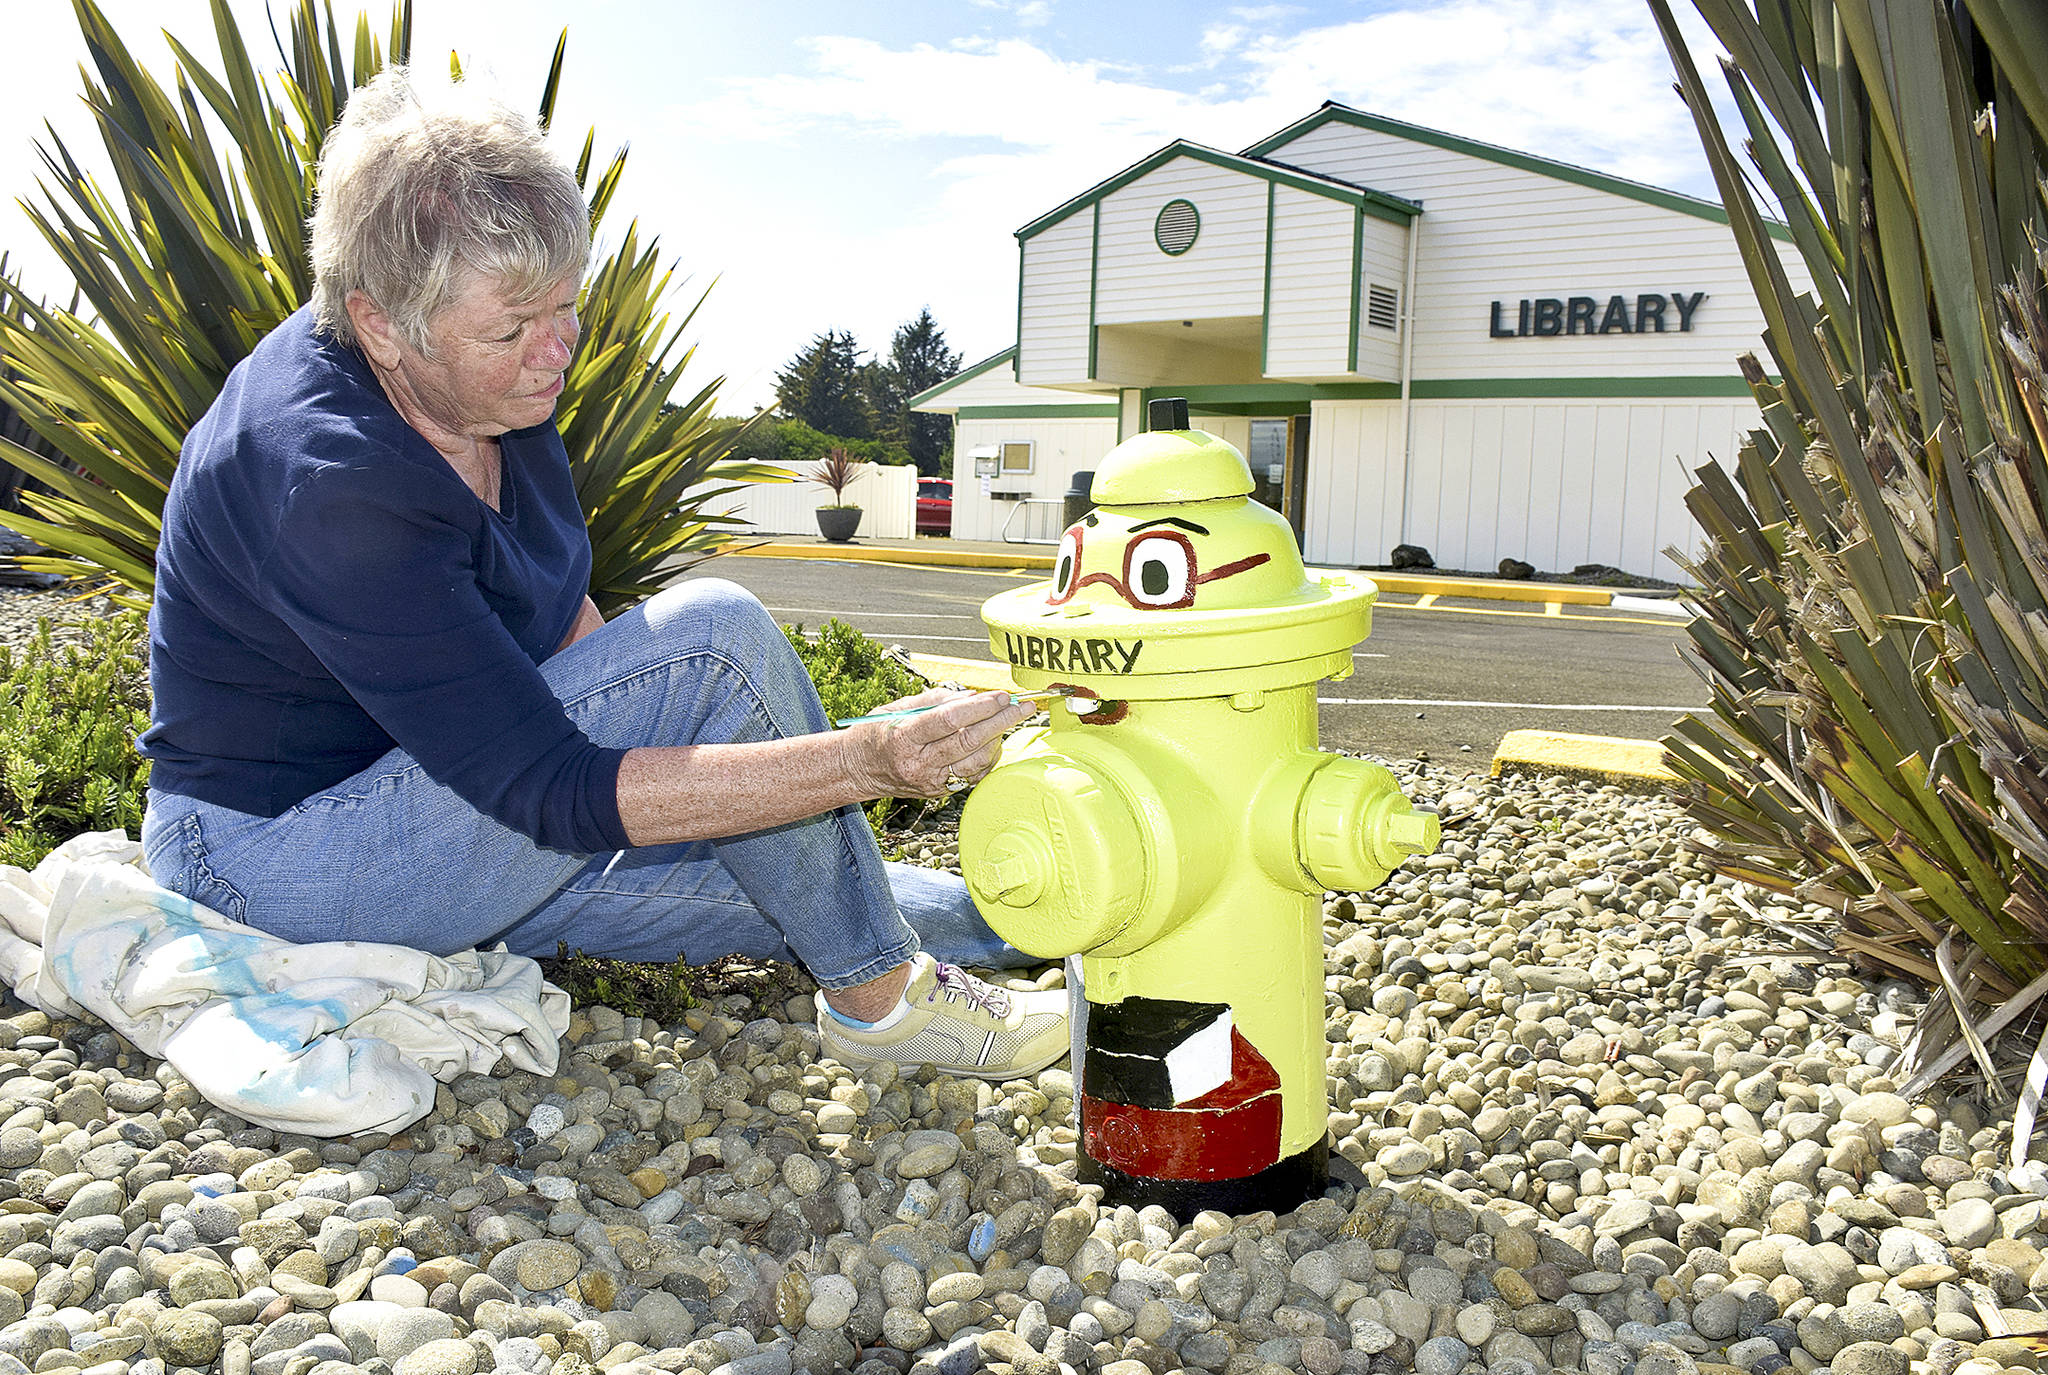 Photo by Scott D. Johnston                                Ocean Shores artist Susan LaMadrid transforms a fire hydrant in front of the Ocean Shores Library into a bookworm, in anticipation of the library’s reopening early next month. The library has been closed since July for an expansion project that has been funded entirely by donations. Meanwhile, the Ocean Shores Fire Department continues its “Adopt a Hydrant” plug painting project, in which anyone can participate by stopping by the Fire Station, next door to the library, for information and applications.                                Ocean Shores artist Susan LaMadrid transforms a fire hydrant in front of the Ocean Shores Library into a bookworm, in anticipation of the library’s reopening early next month. The facility on Pt. Brown Ave. NE has been closed since July for an expansion project that has been funded entirely by donations. Meanwhile, the Ocean Shores Fire Department continues its “Adopt a Hydrant” plug painting project, in which anyone can participate by stopping by the Fire Station, next door to the library, for information and applications. (Photo by Scott D. Johnston)